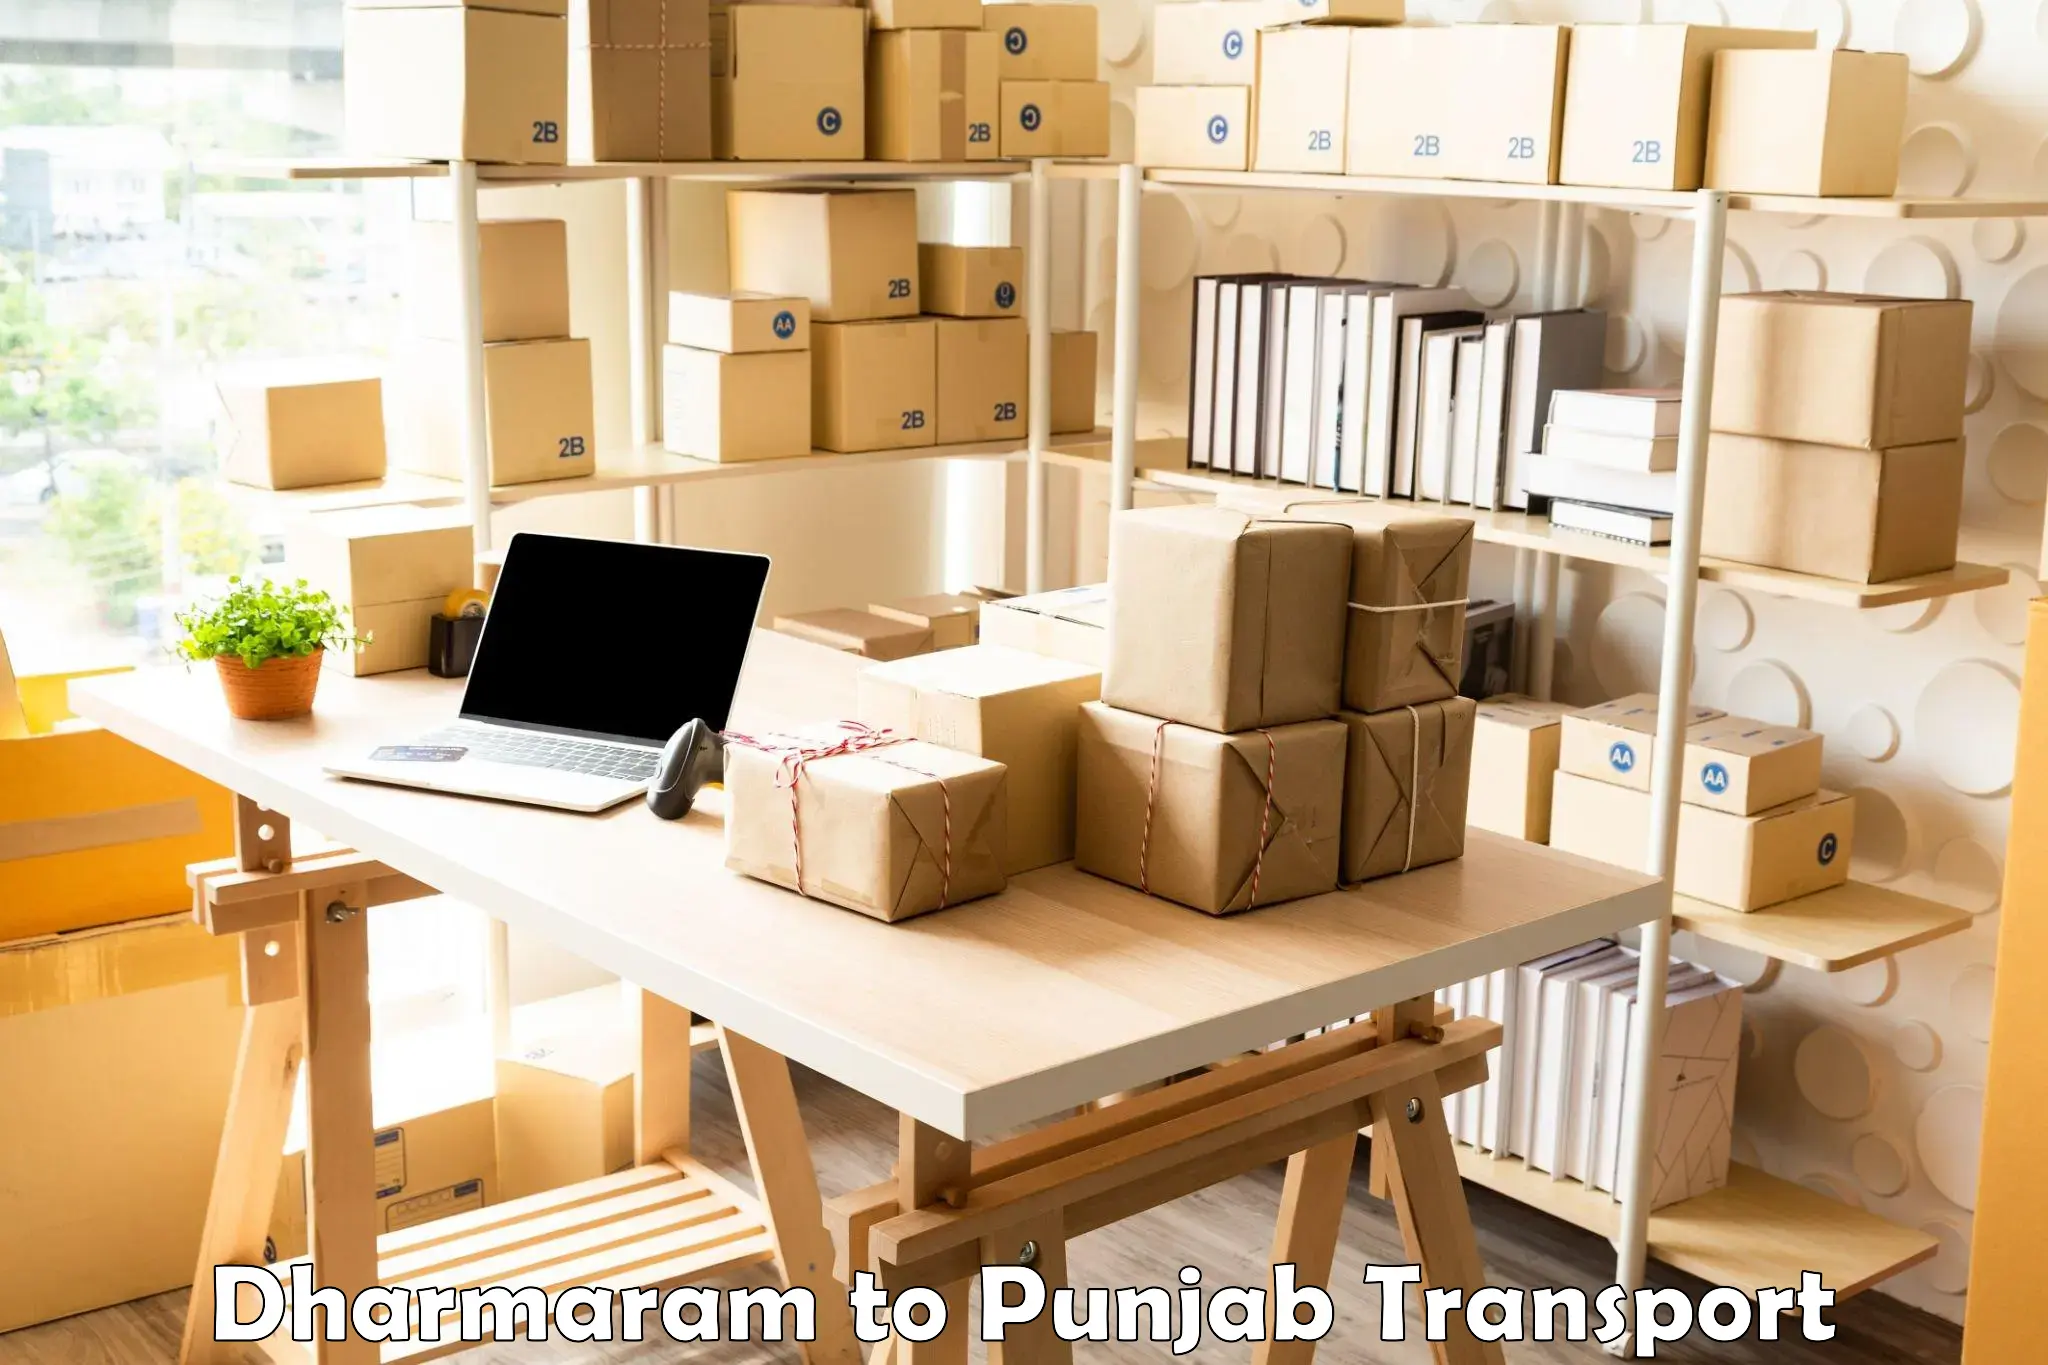 Pick up transport service in Dharmaram to Firozpur